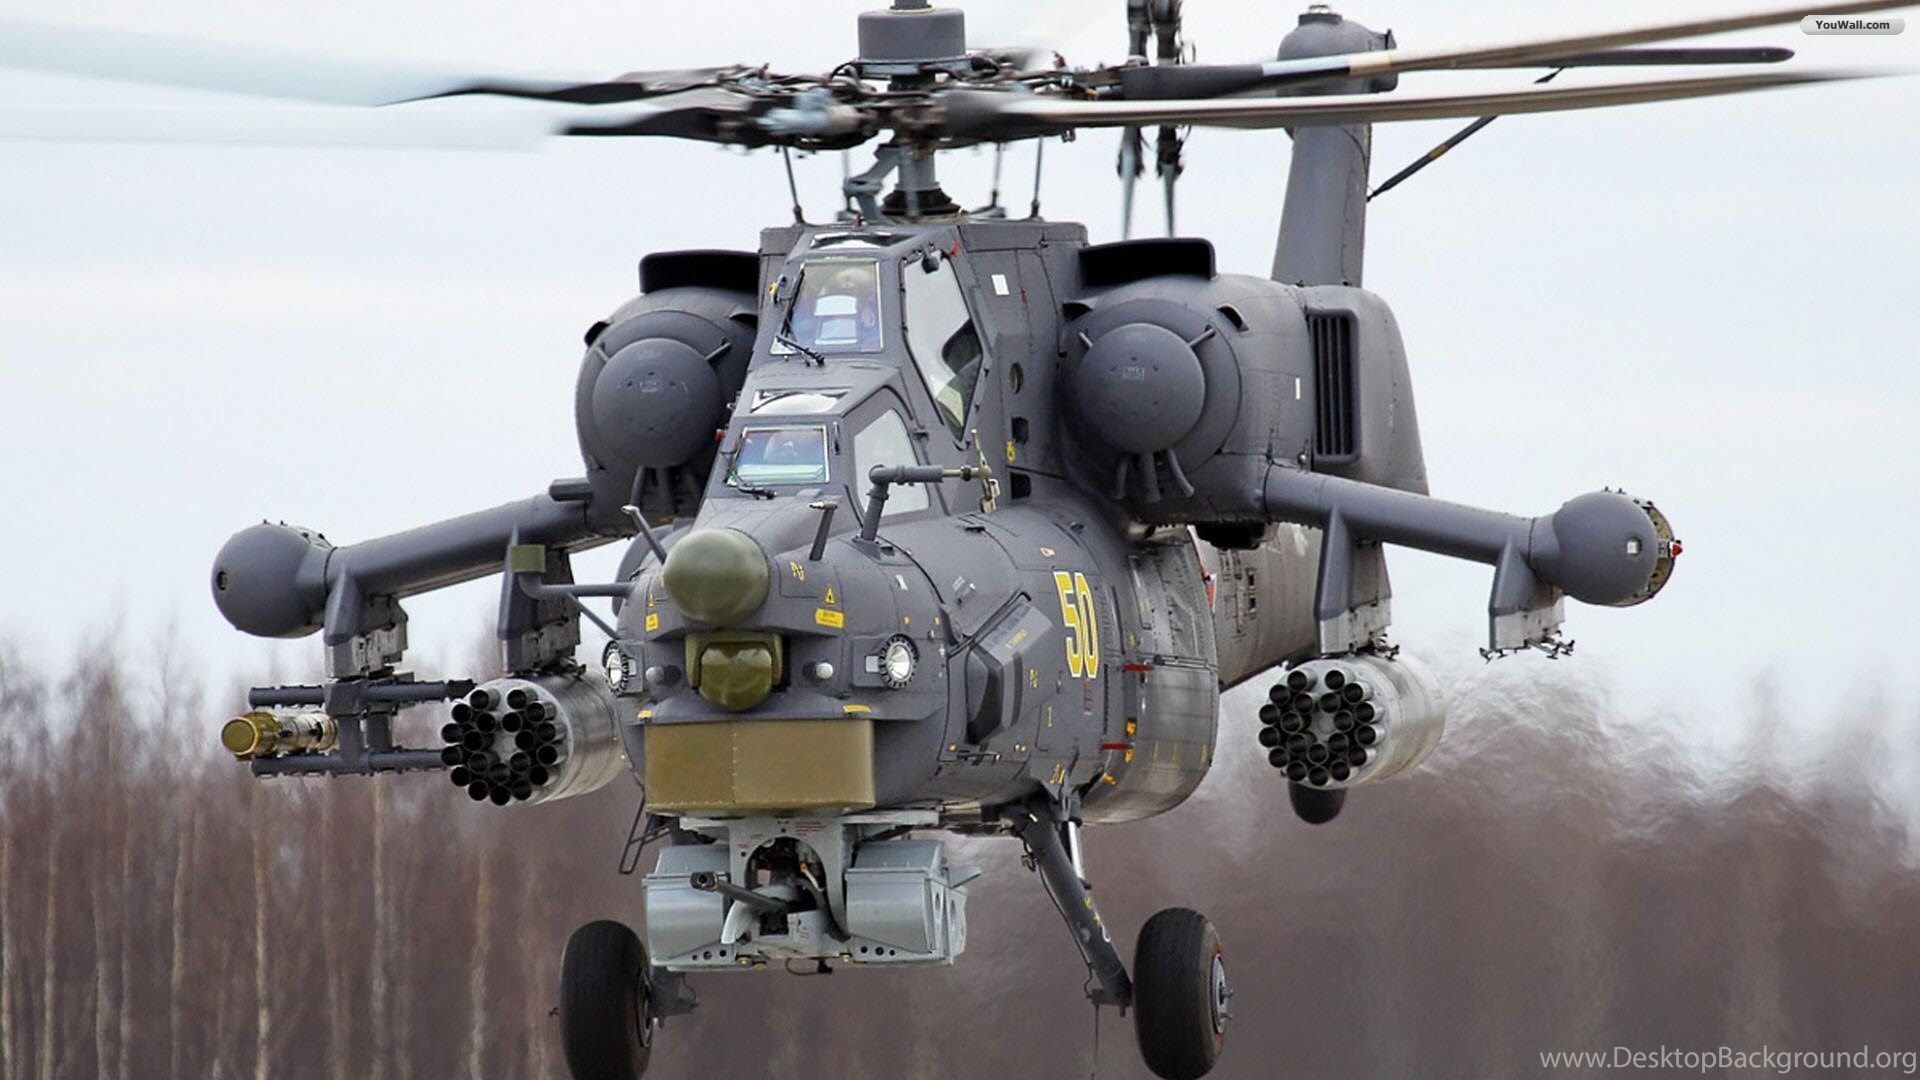 Military Helicopter Wallpapers